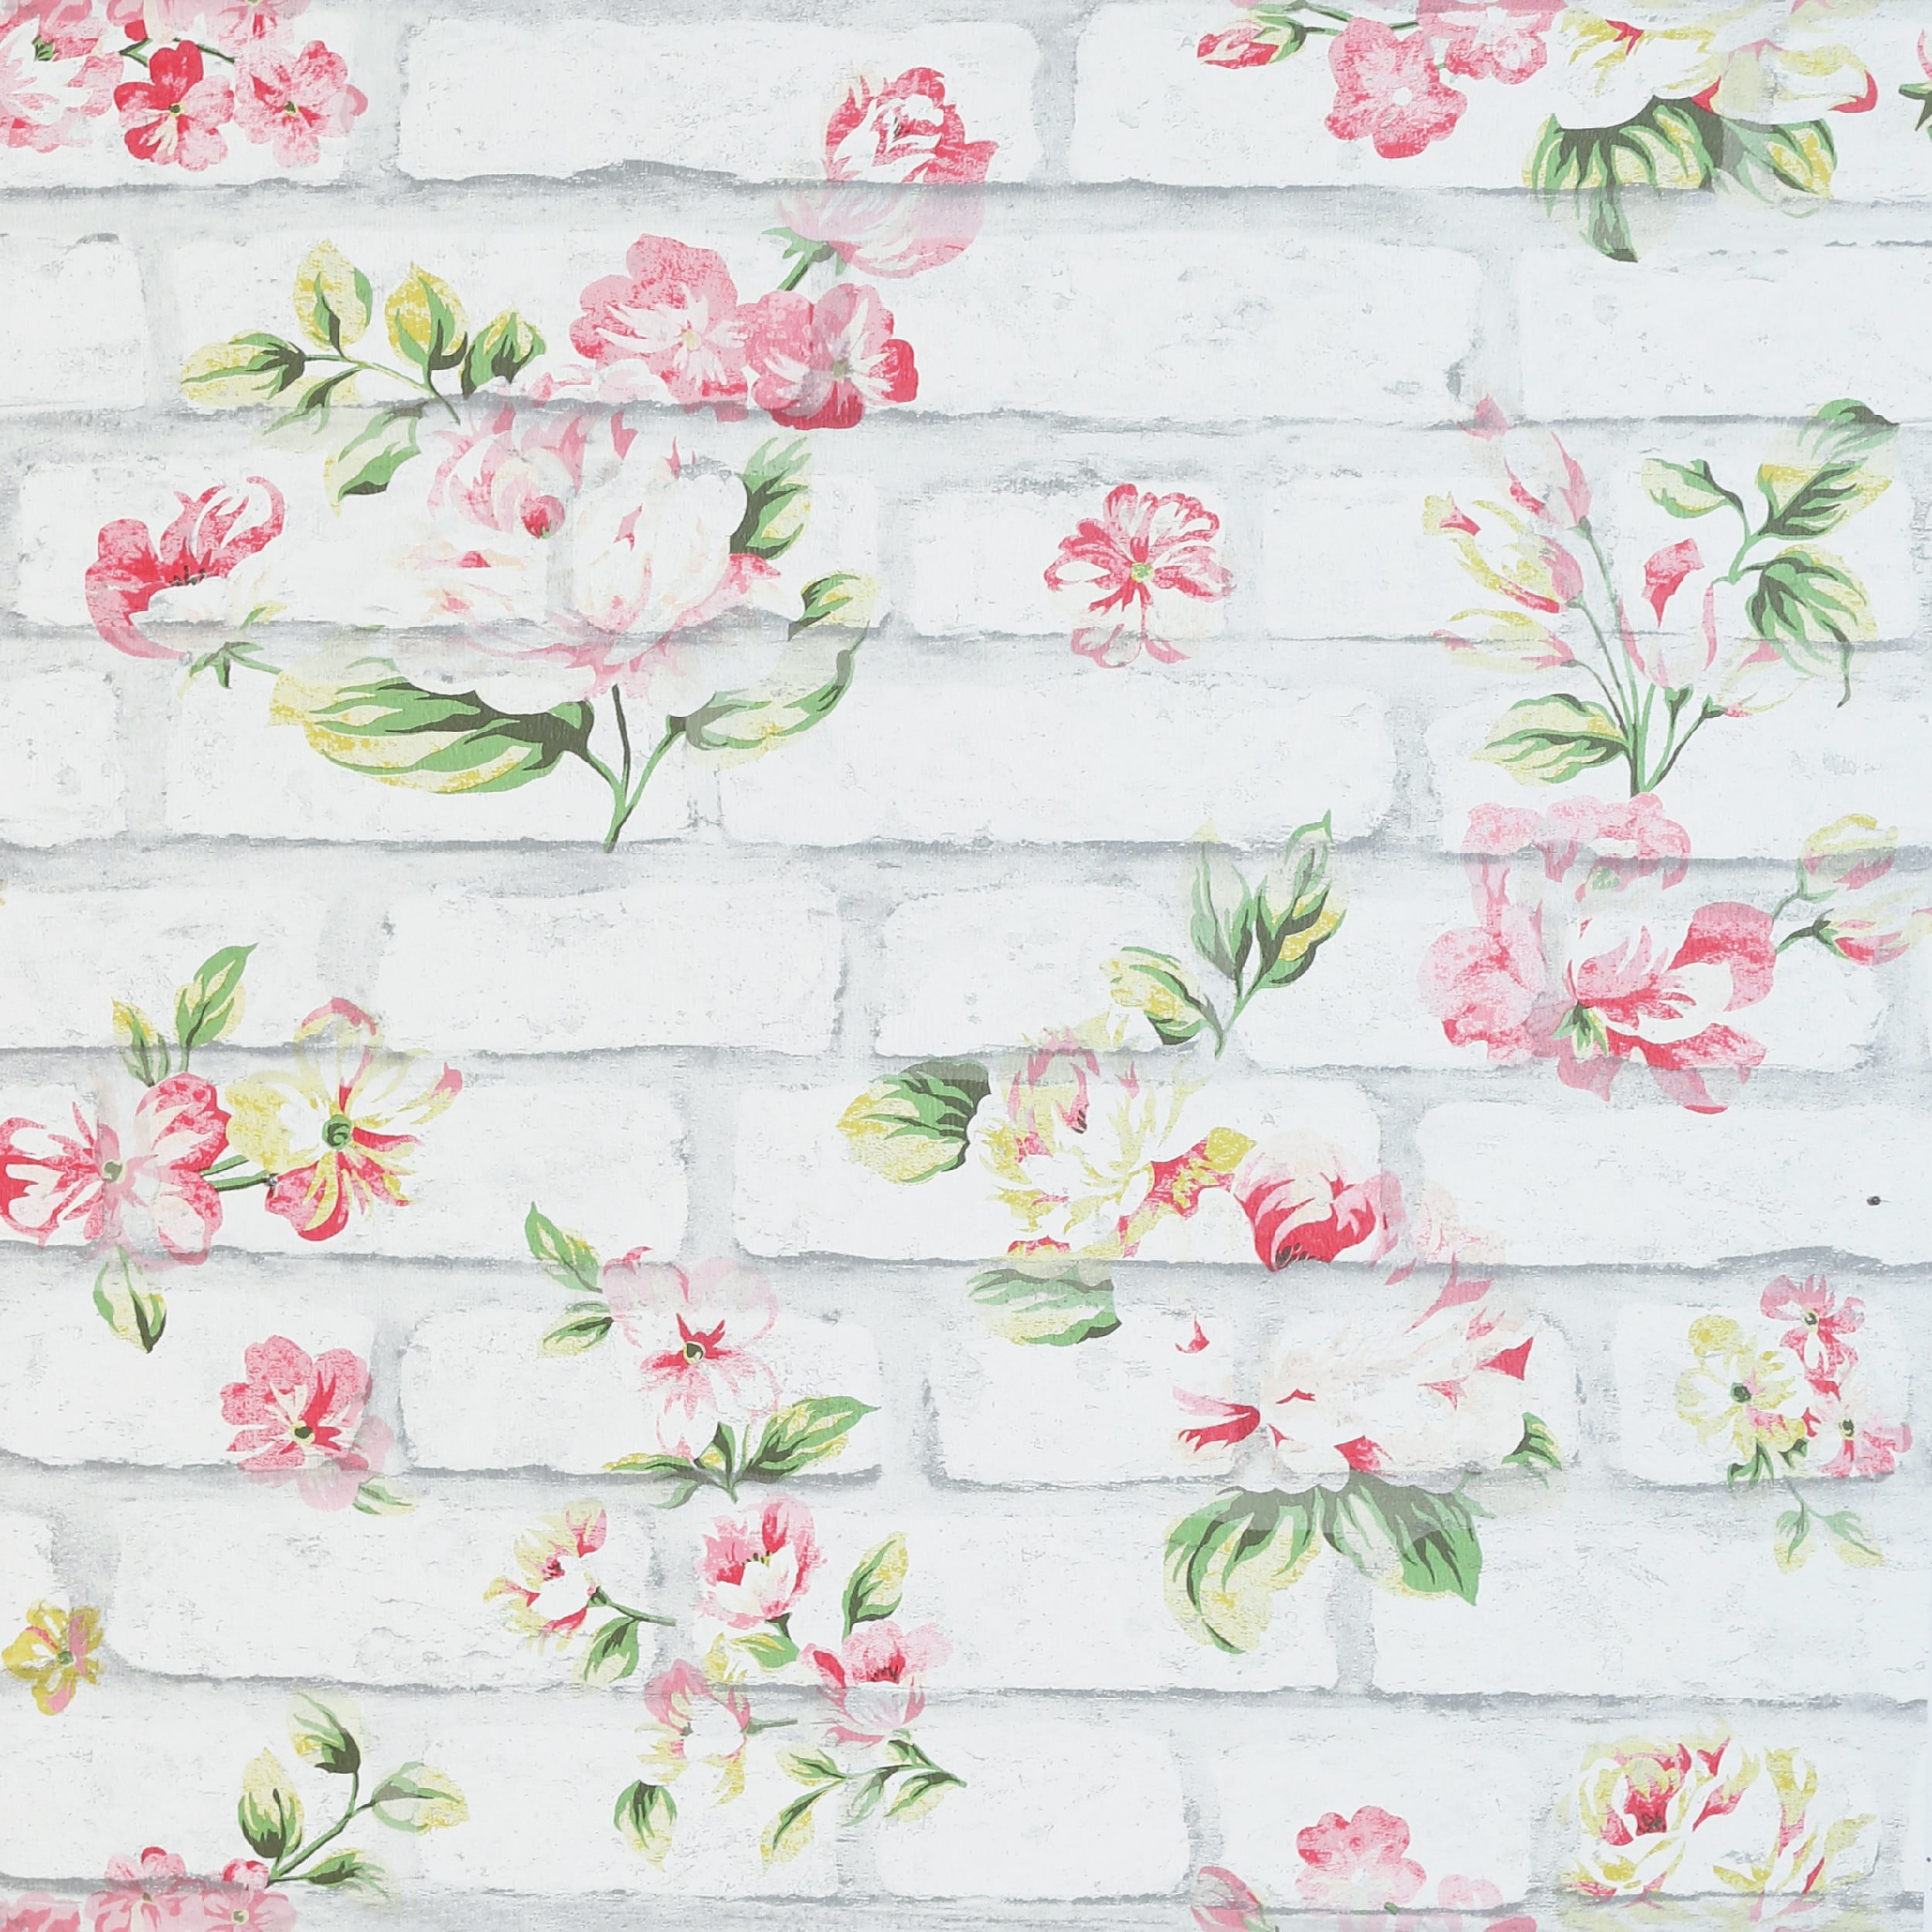 Shabby Chic Wallpaper Images Browse 82185 Stock Photos  Vectors Free  Download with Trial  Shutterstock